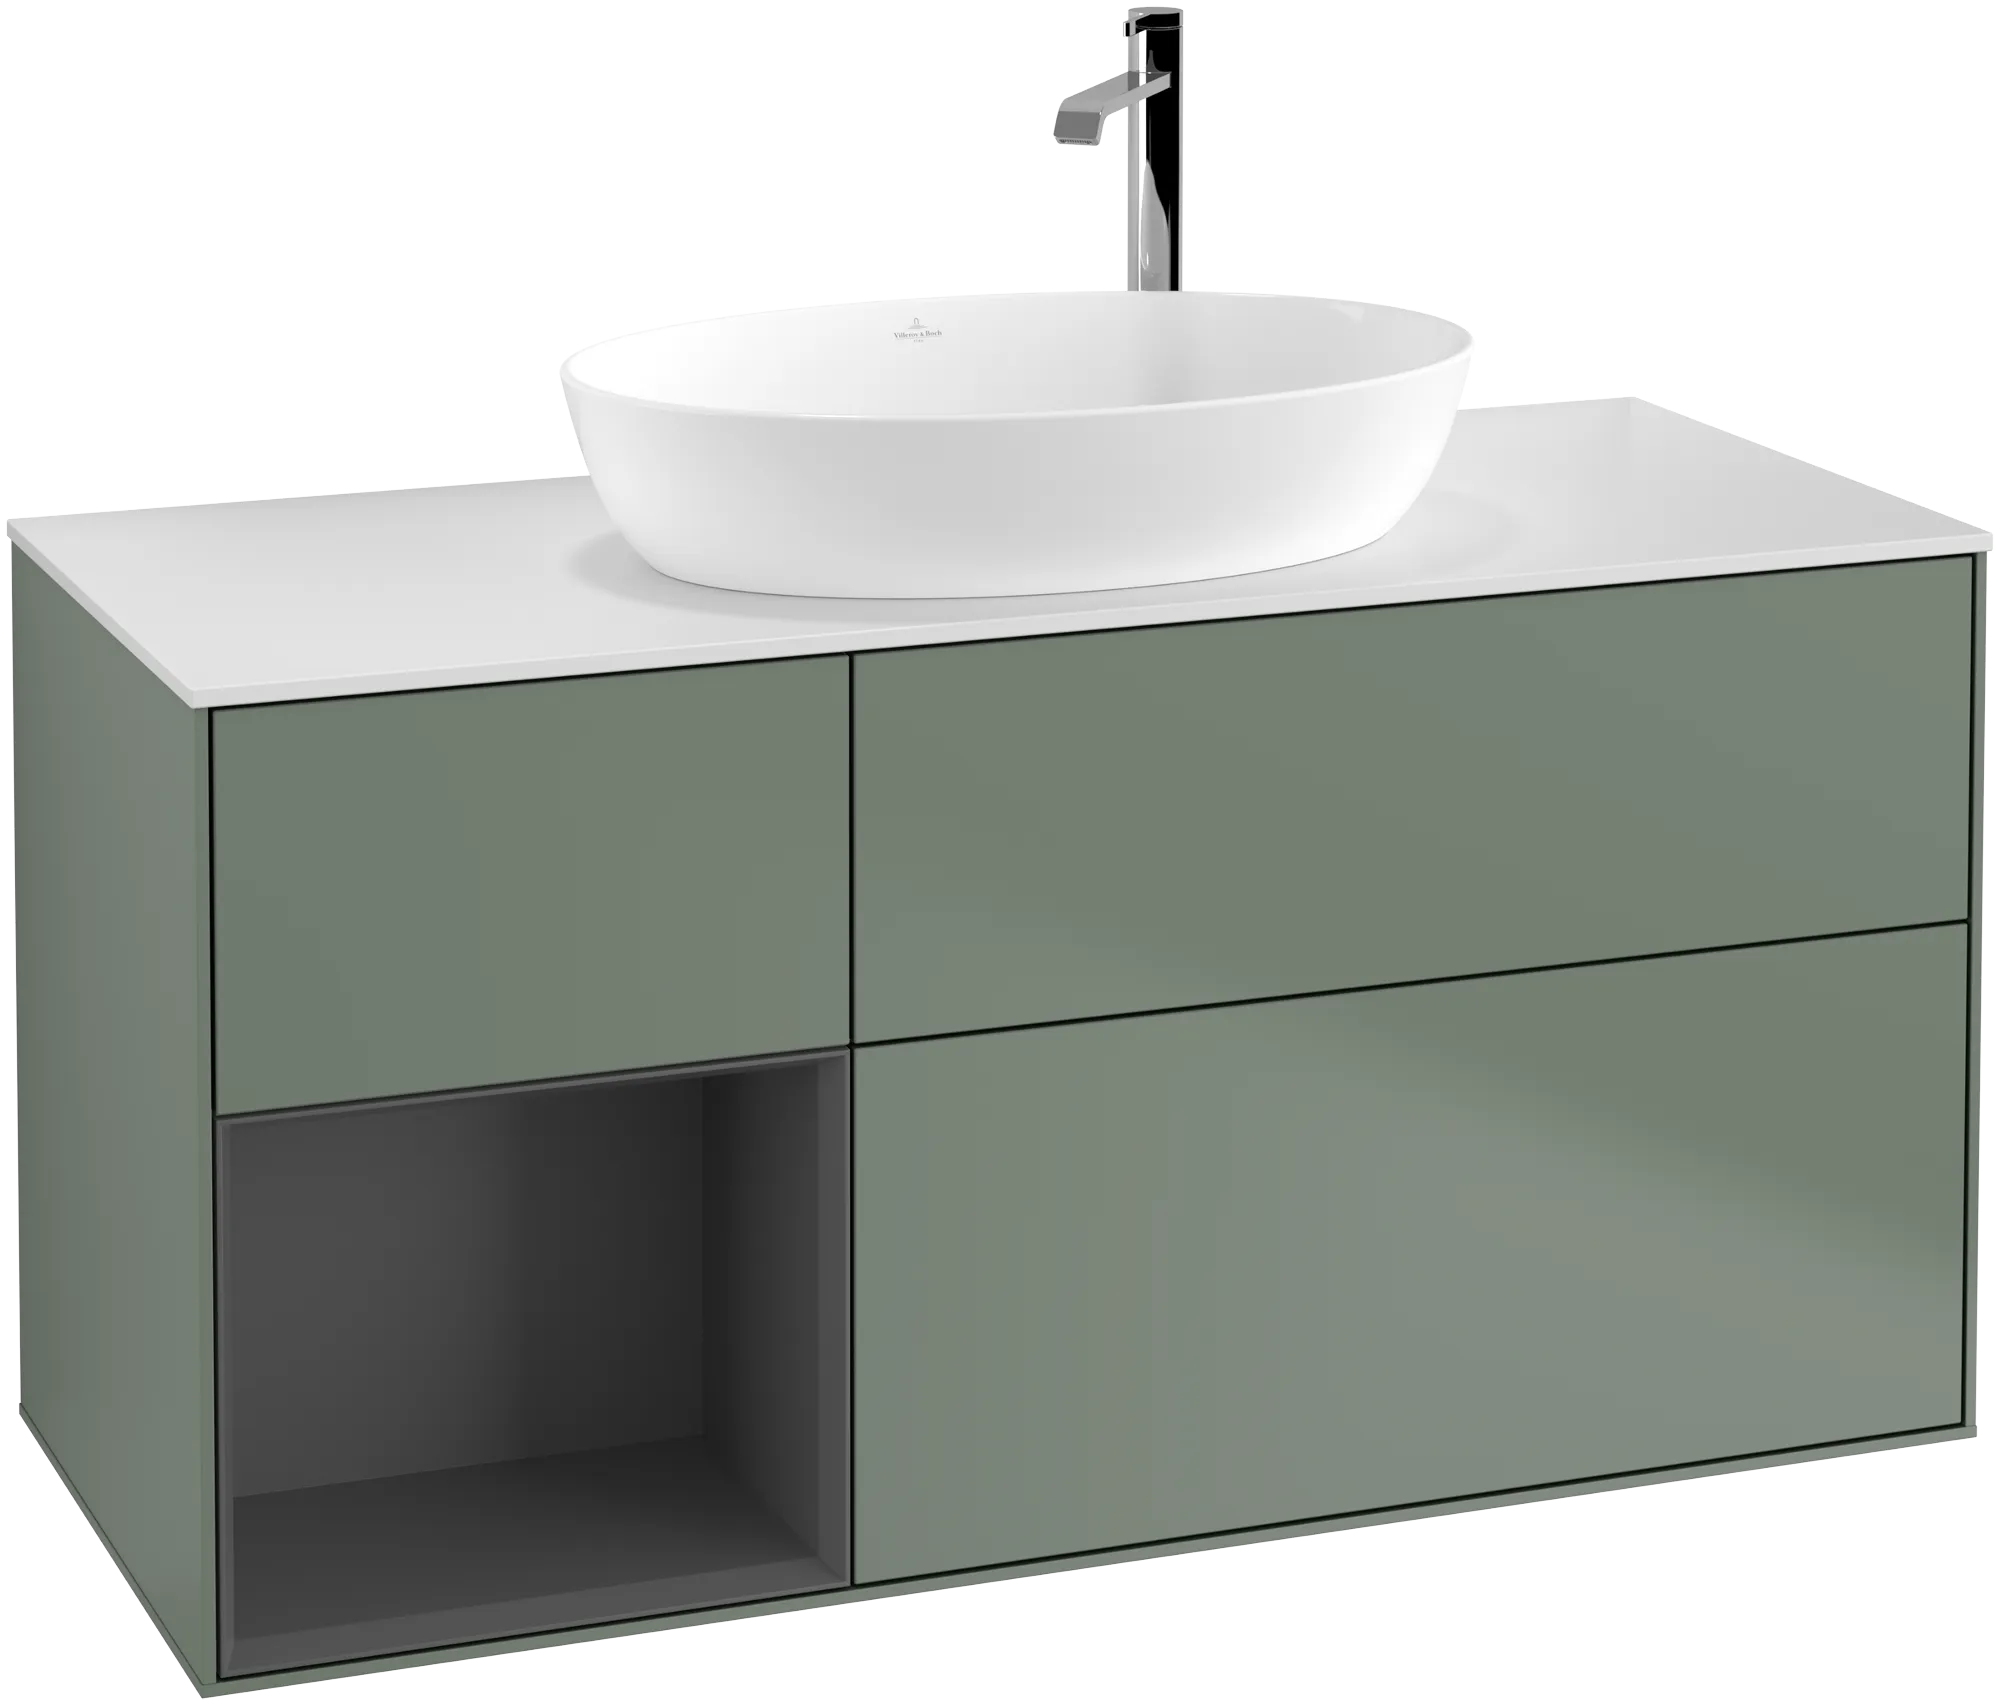 Зображення з  VILLEROY BOCH Finion Vanity unit, with lighting, 3 pull-out compartments, 1200 x 603 x 501 mm, Olive Matt Lacquer / Anthracite Matt Lacquer / Glass White Matt #G941GKGM